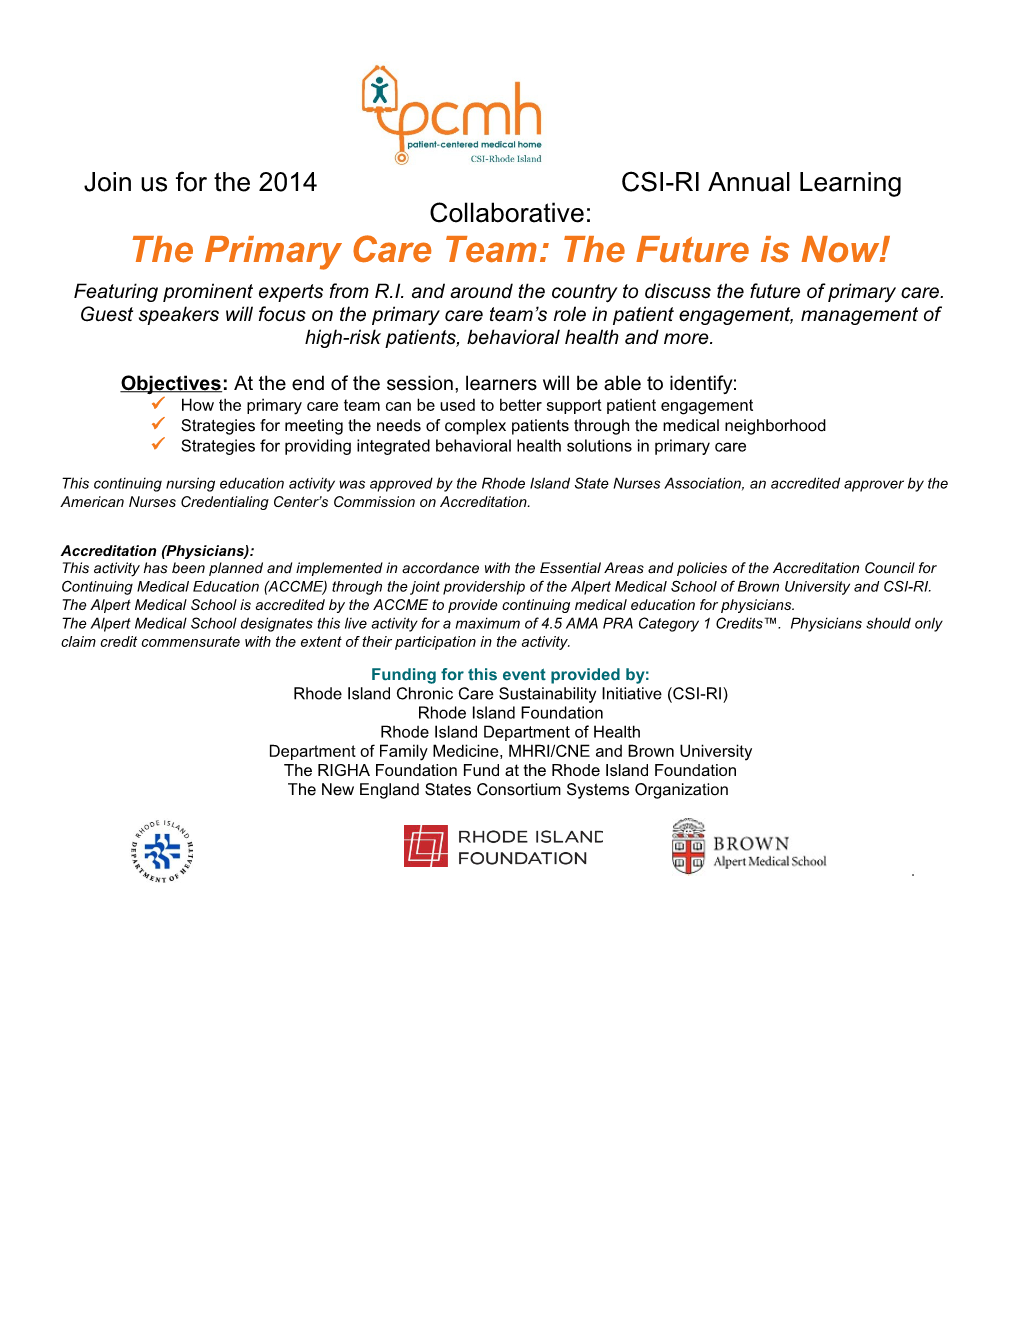 Join Us for the 2014 CSI-RI Annual Learning Collaborative